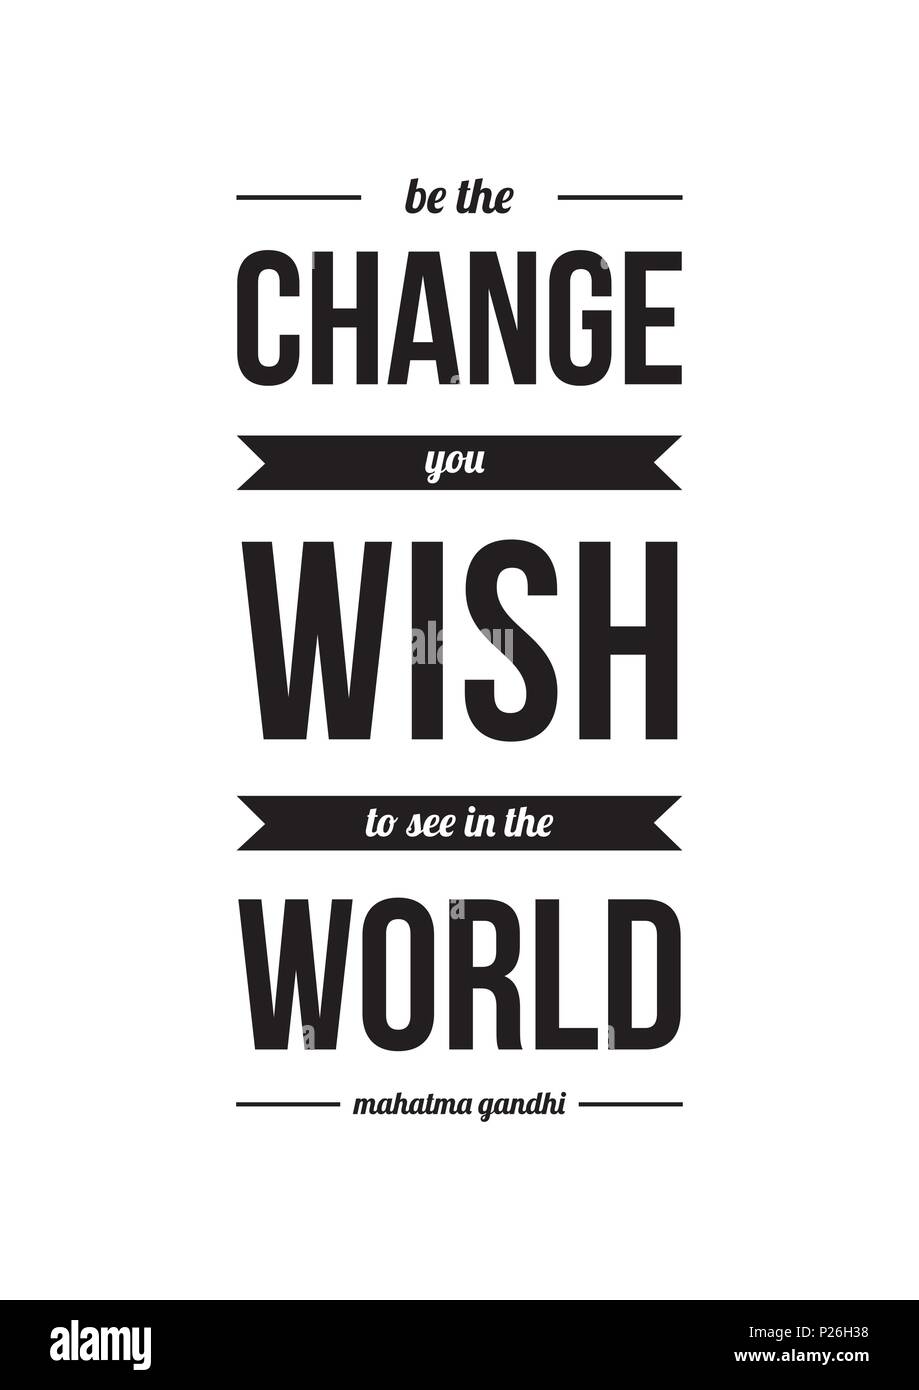 be the change you wish to see in the world quote saying - mahatma Gandhi typography poster vector art home decor frame illustration minimalist Stock Vector